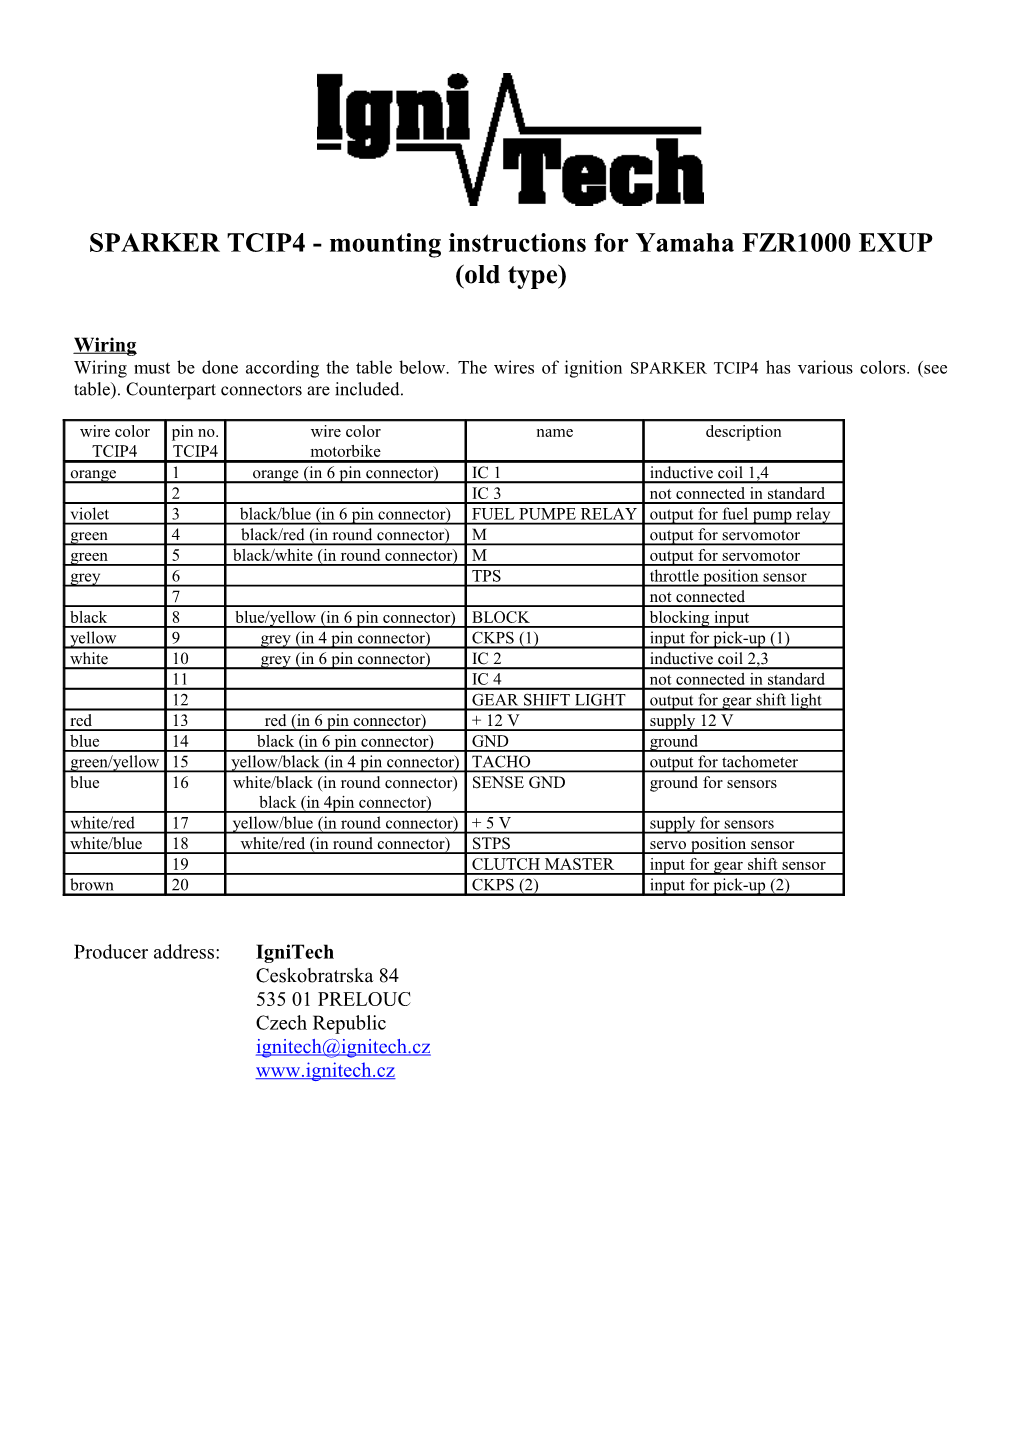 SPARKER TCIP4 - Mounting Instructions for Yamaha FZR1000 EXUP (Old Type)